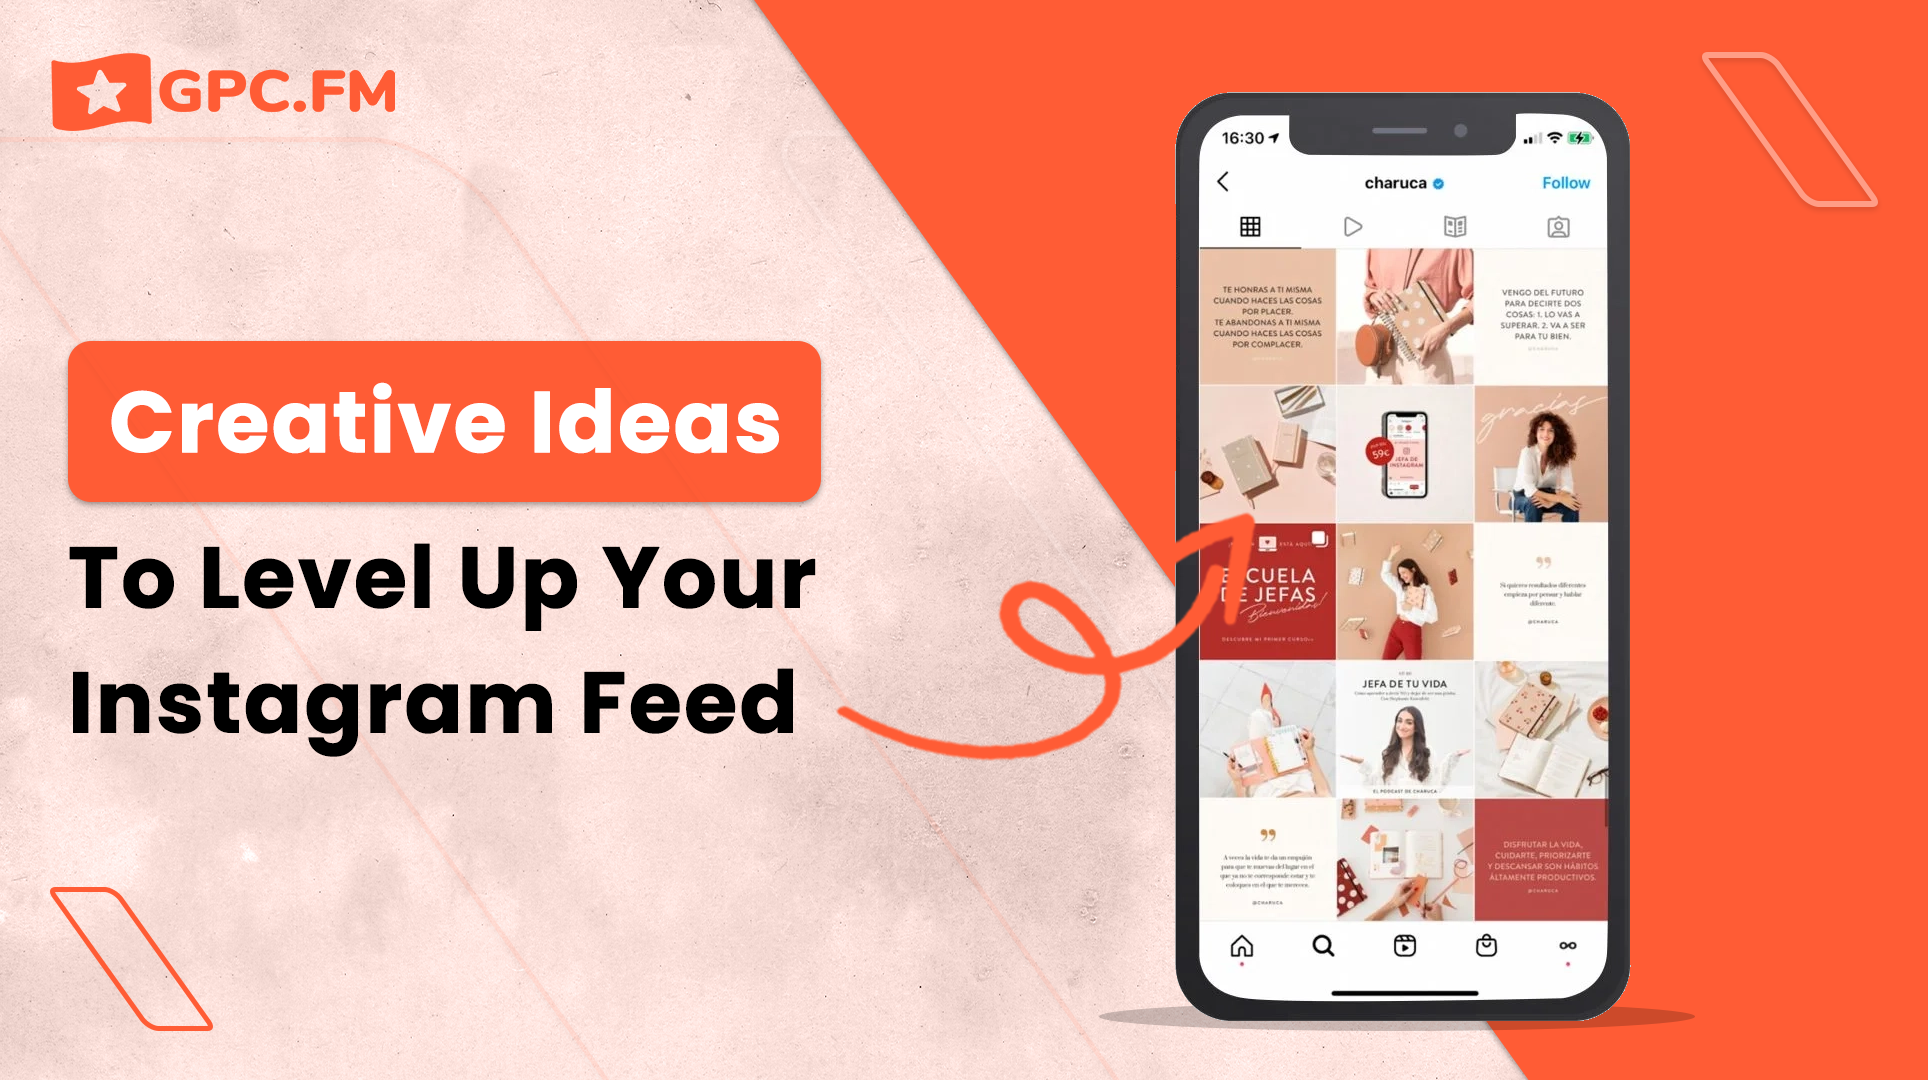 Creative Ideas To Level Up Your Instagram Feed | GPC.fm